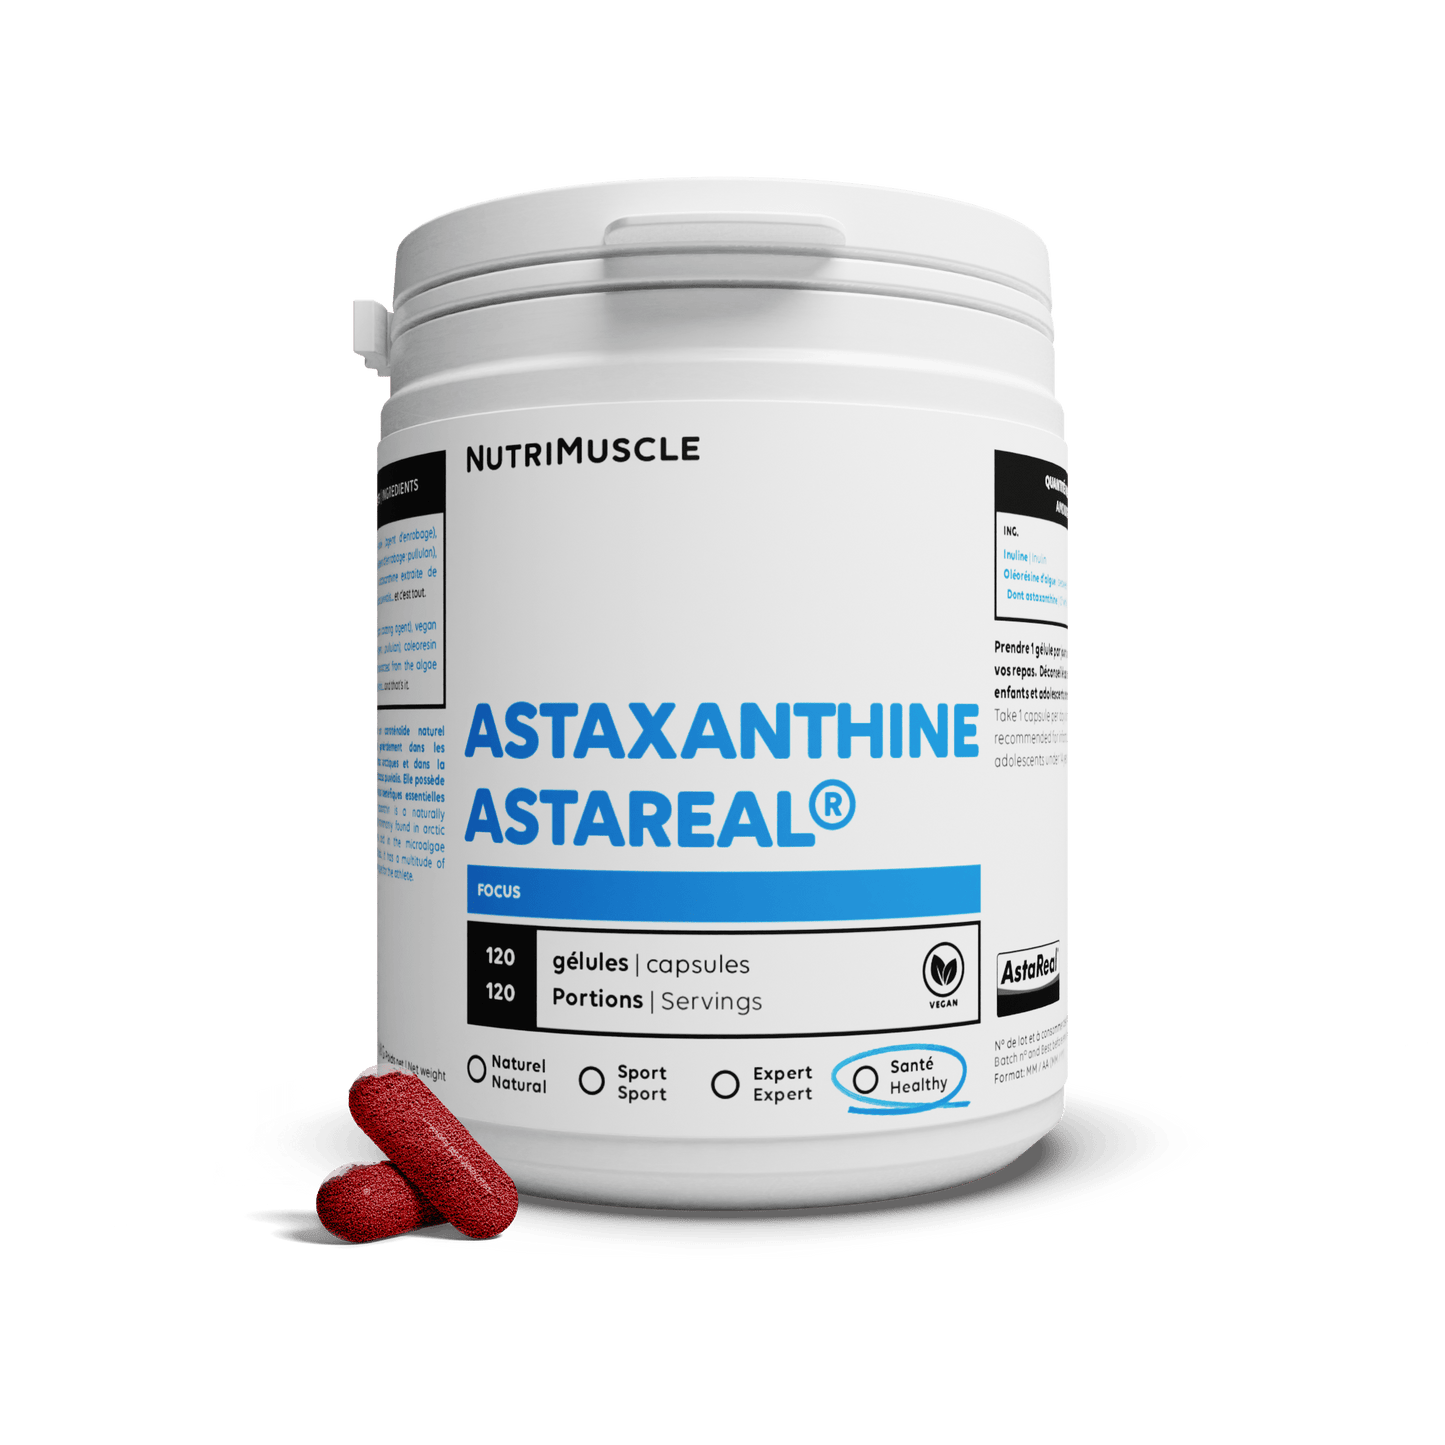 Nutrimuscle Nutriments 120 gélules Astaxanthine Astareal®